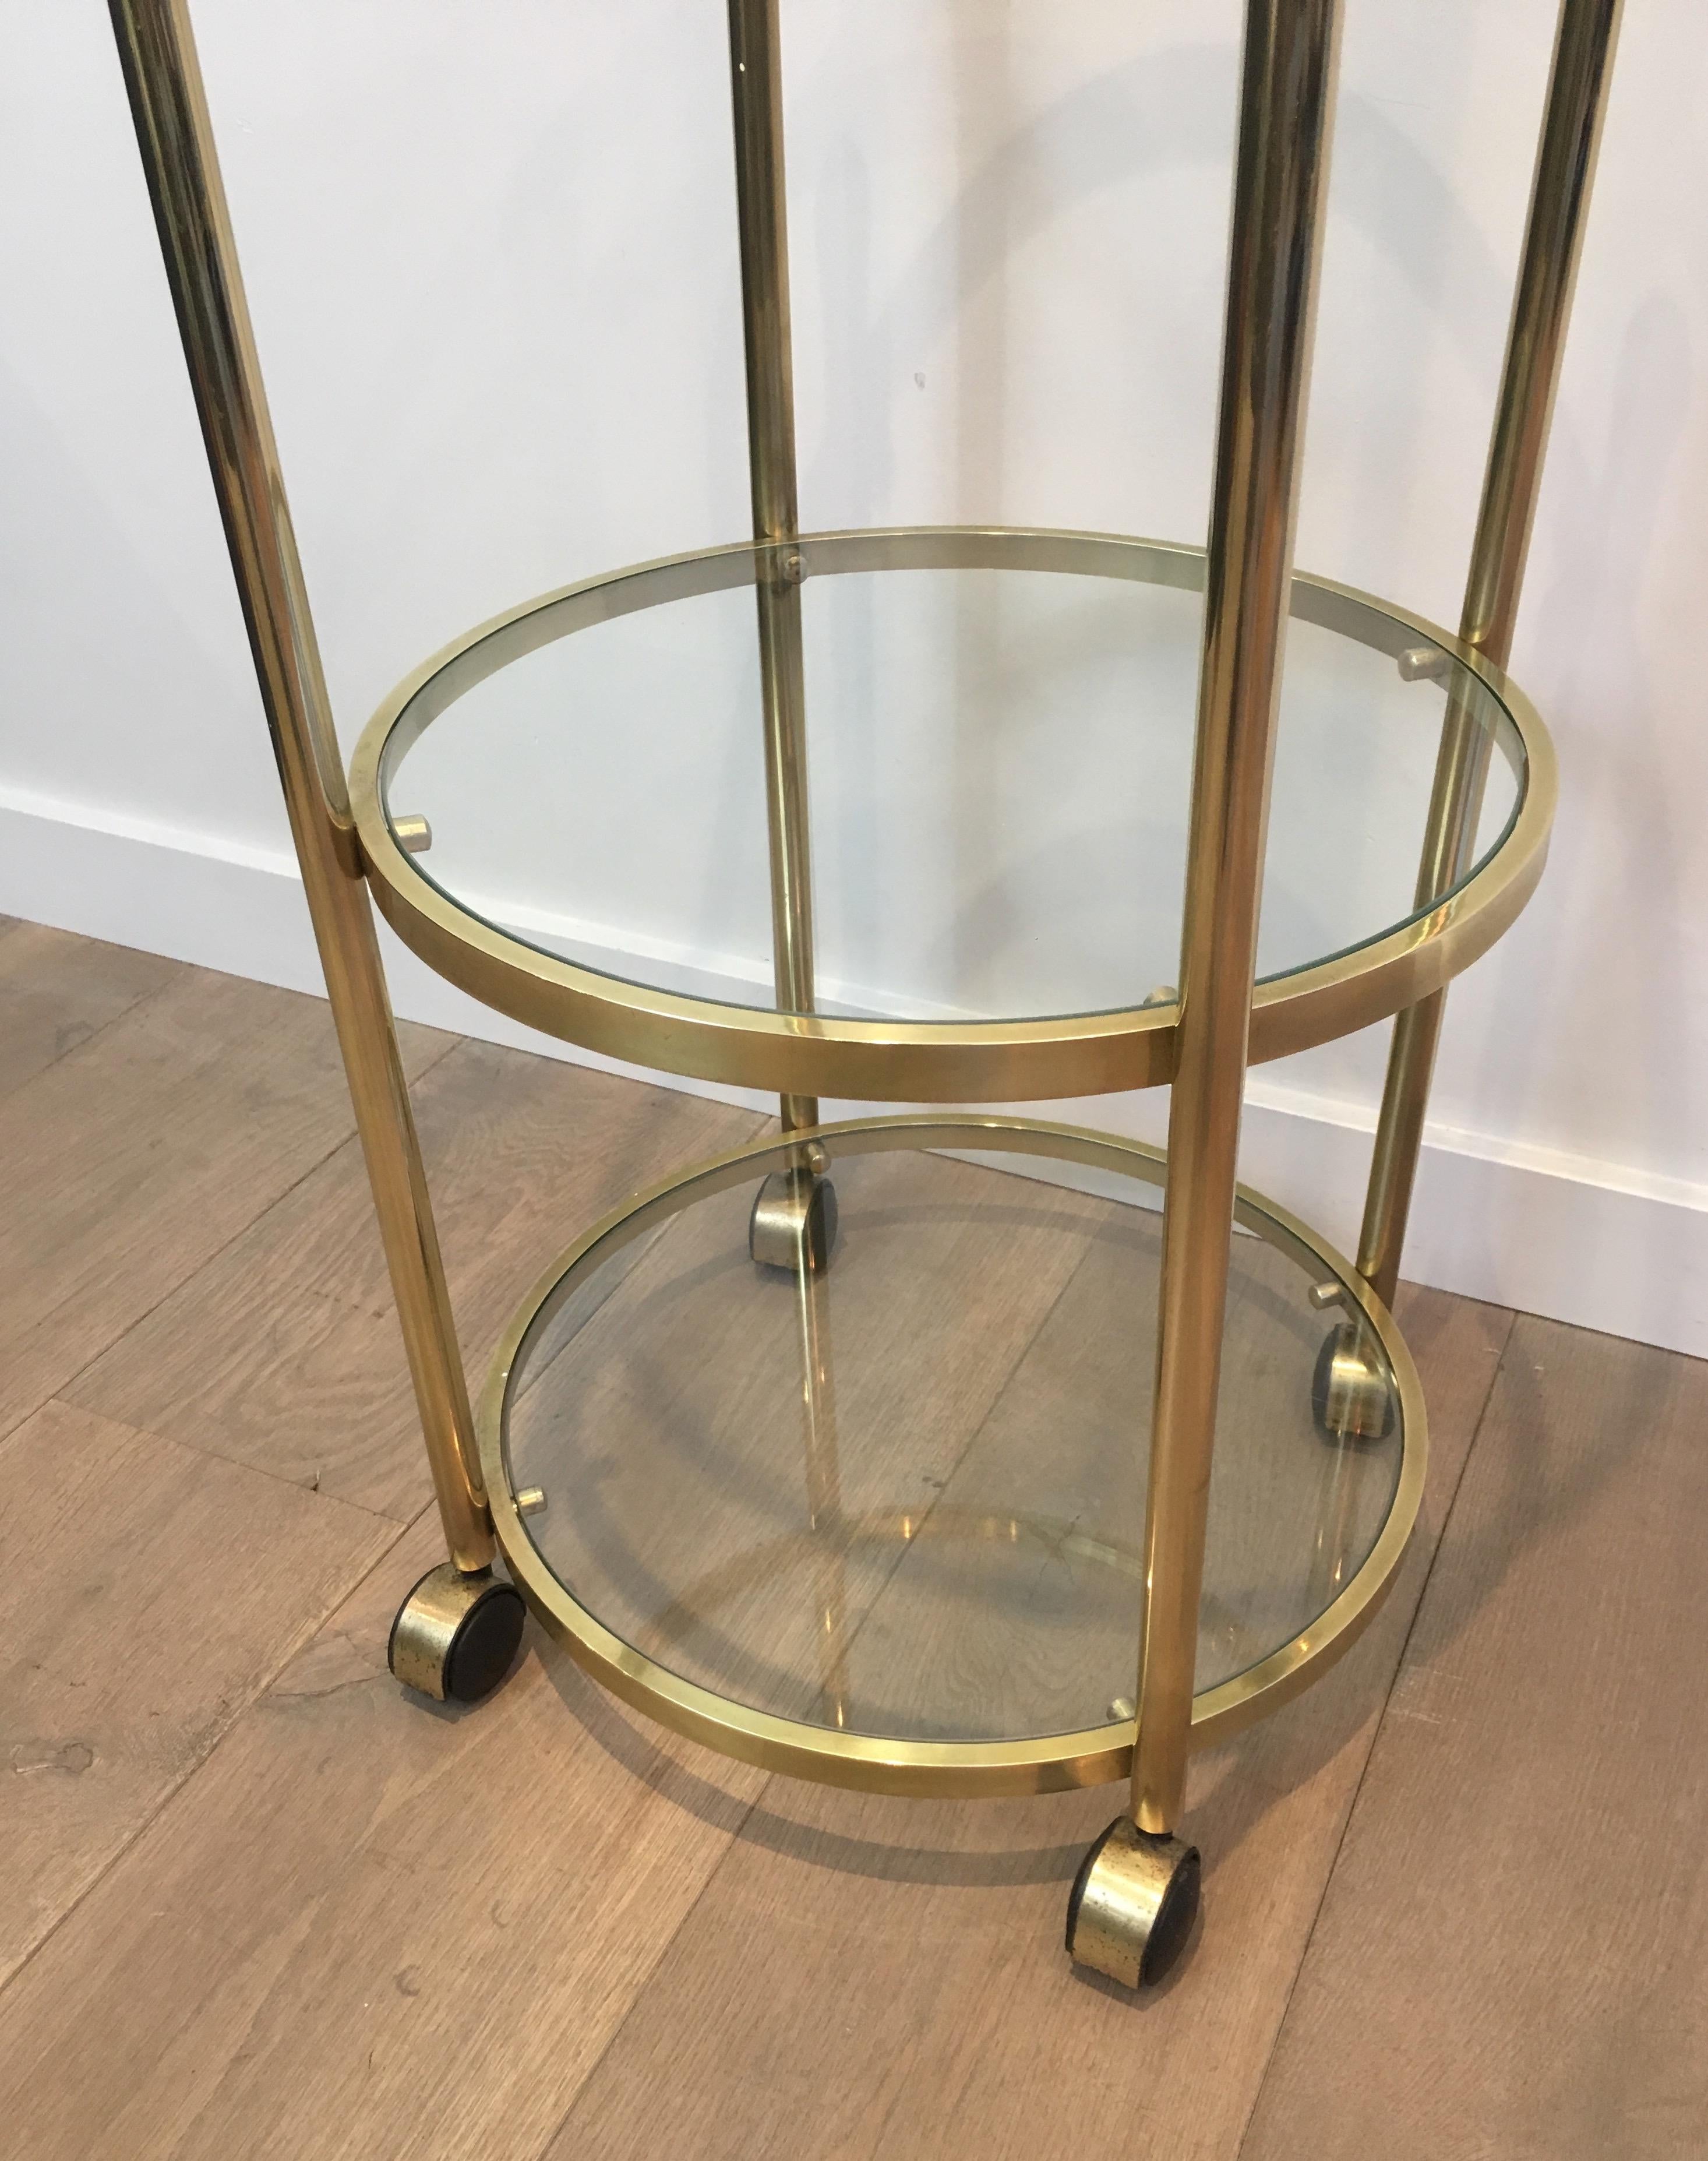 Metal 3 Tiers Round Brass Side Table on Casters, French, circa 1970